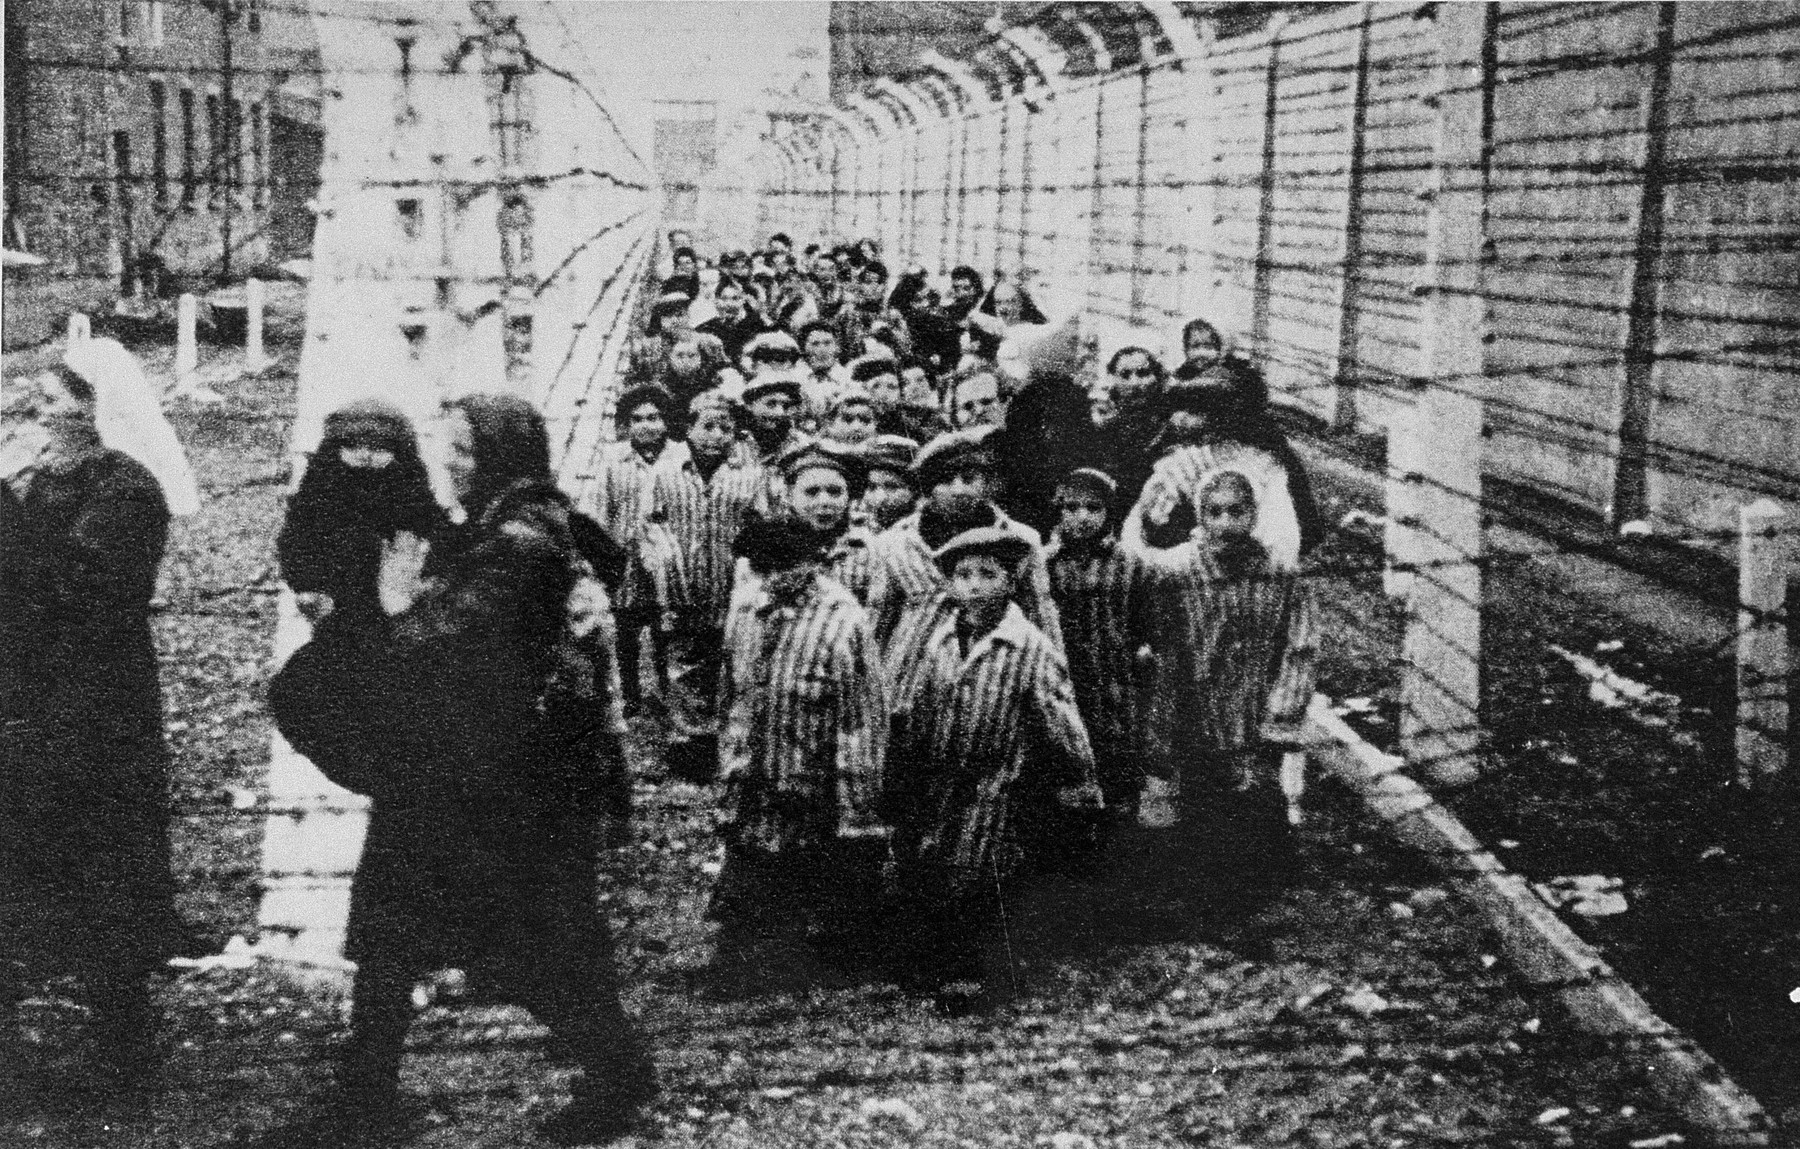 Wearing adult-size prisoner jackets, child survivors of Auschwitz are led by relief workers and Soviet soldiers through a narrow passage between two barbed-wire fences.

STILL PHOTOGRAPH FROM THE SOVIET FILM of the liberation of Auschwitz, taken by the film unit of the First Ukrainian Front.